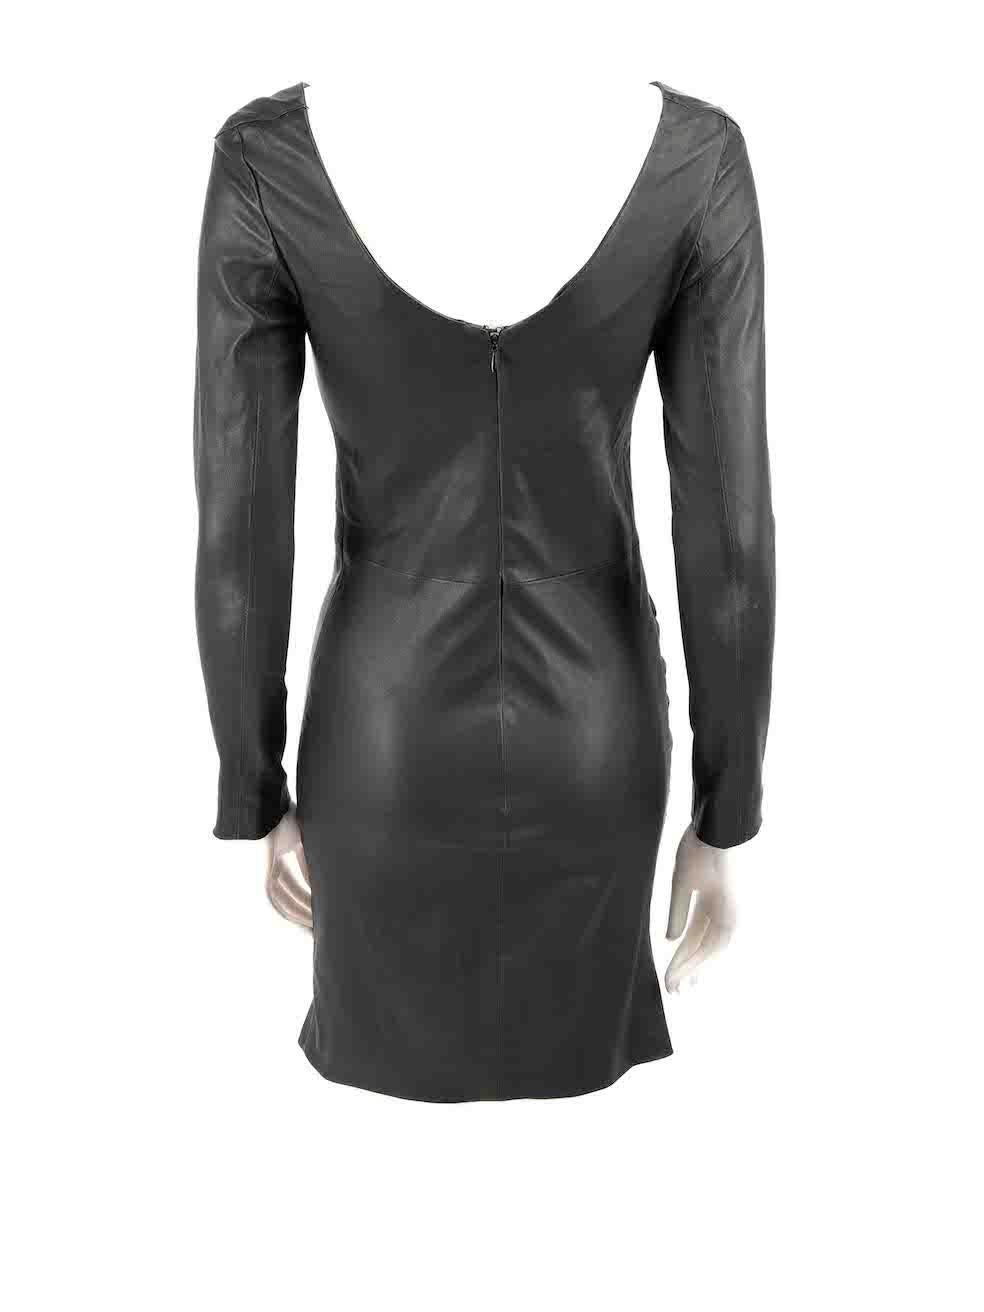 Maje Black Leather Mini Dress Size M In Good Condition For Sale In London, GB